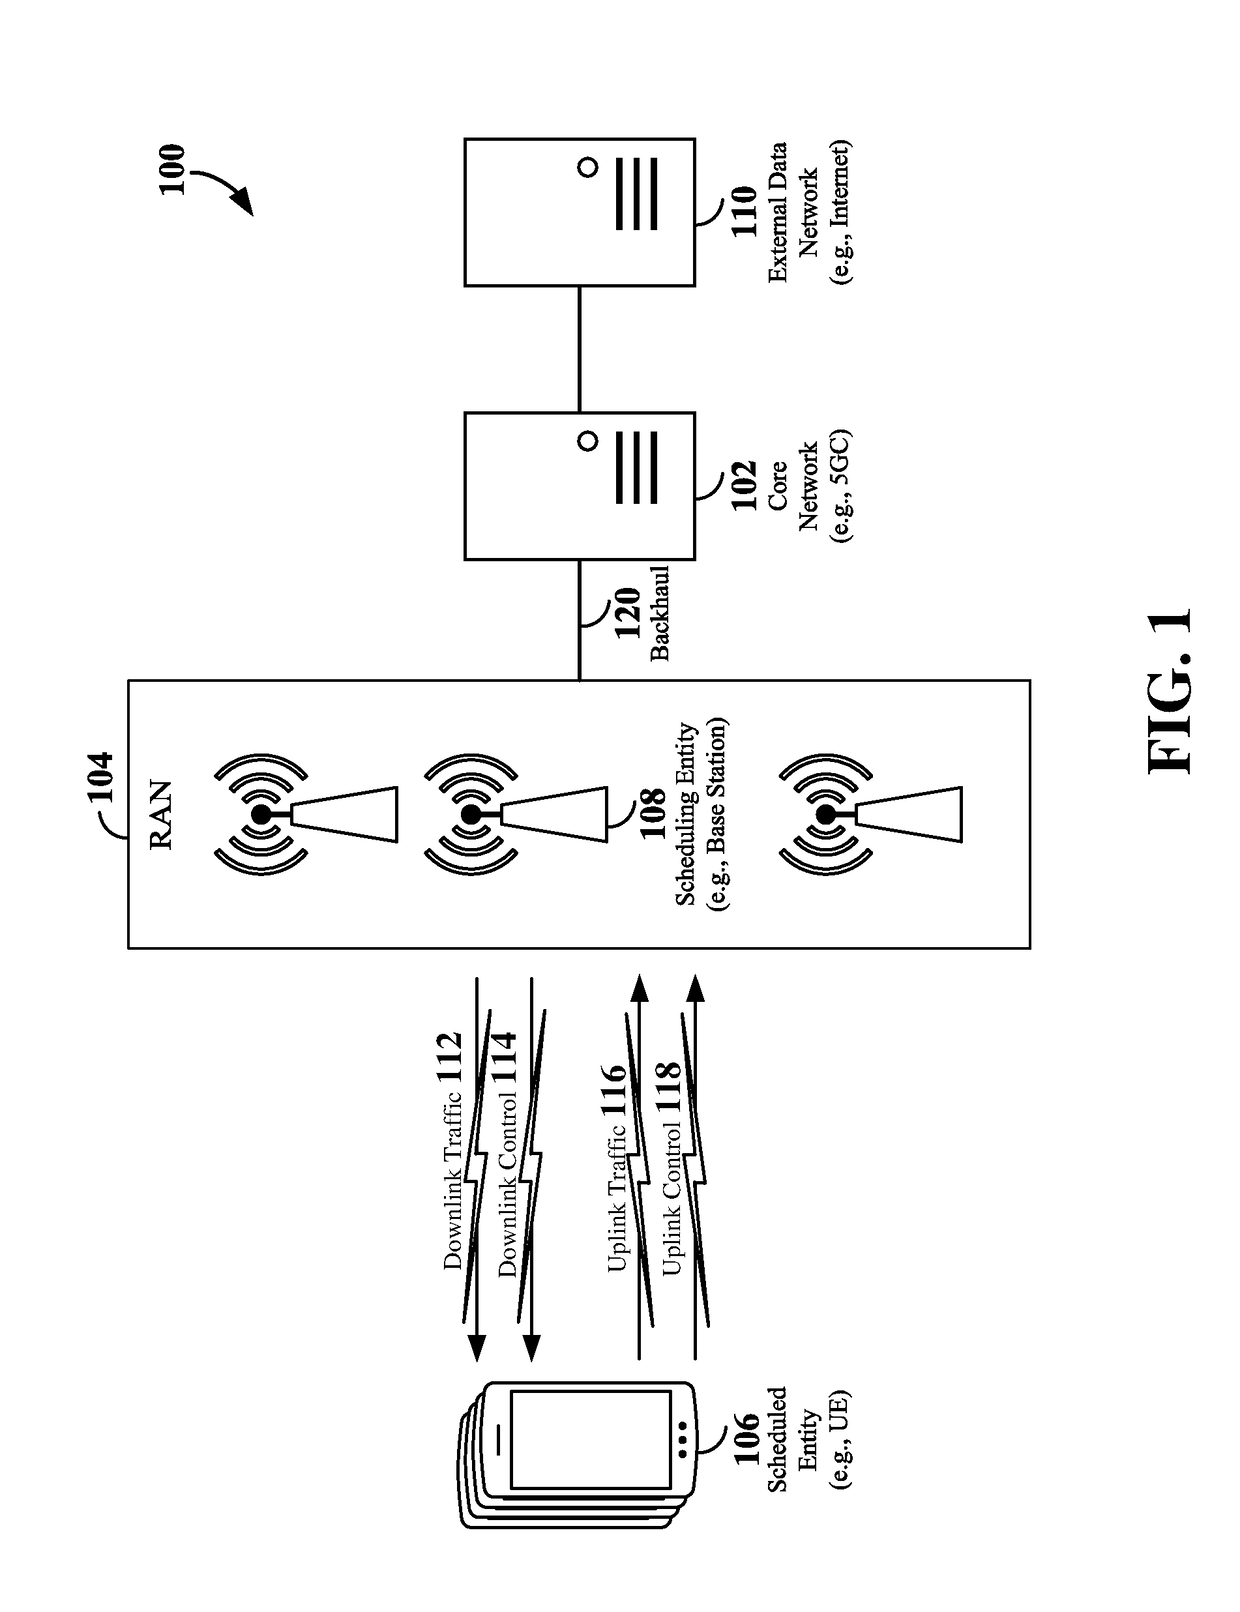 Uplink hopping pattern modes for hybrid automatic repeat request (HARQ) transmissions